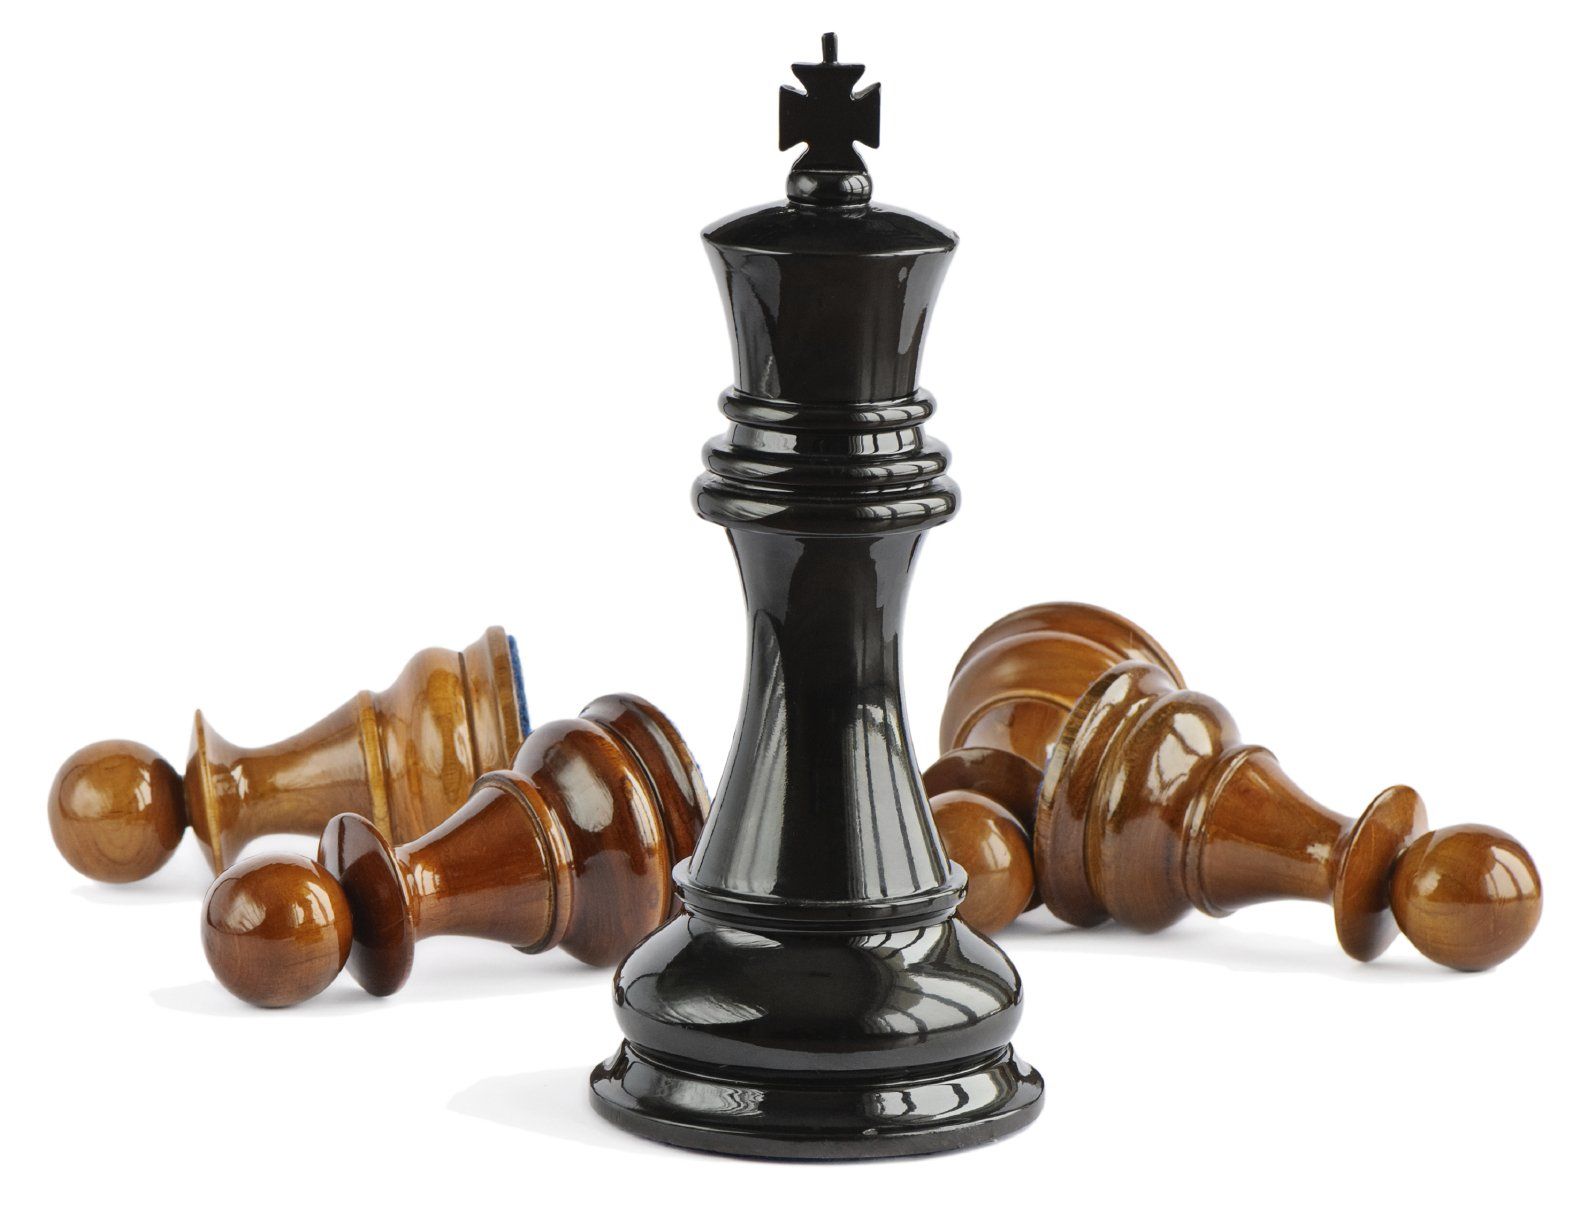 Five chess pieces against a white background.